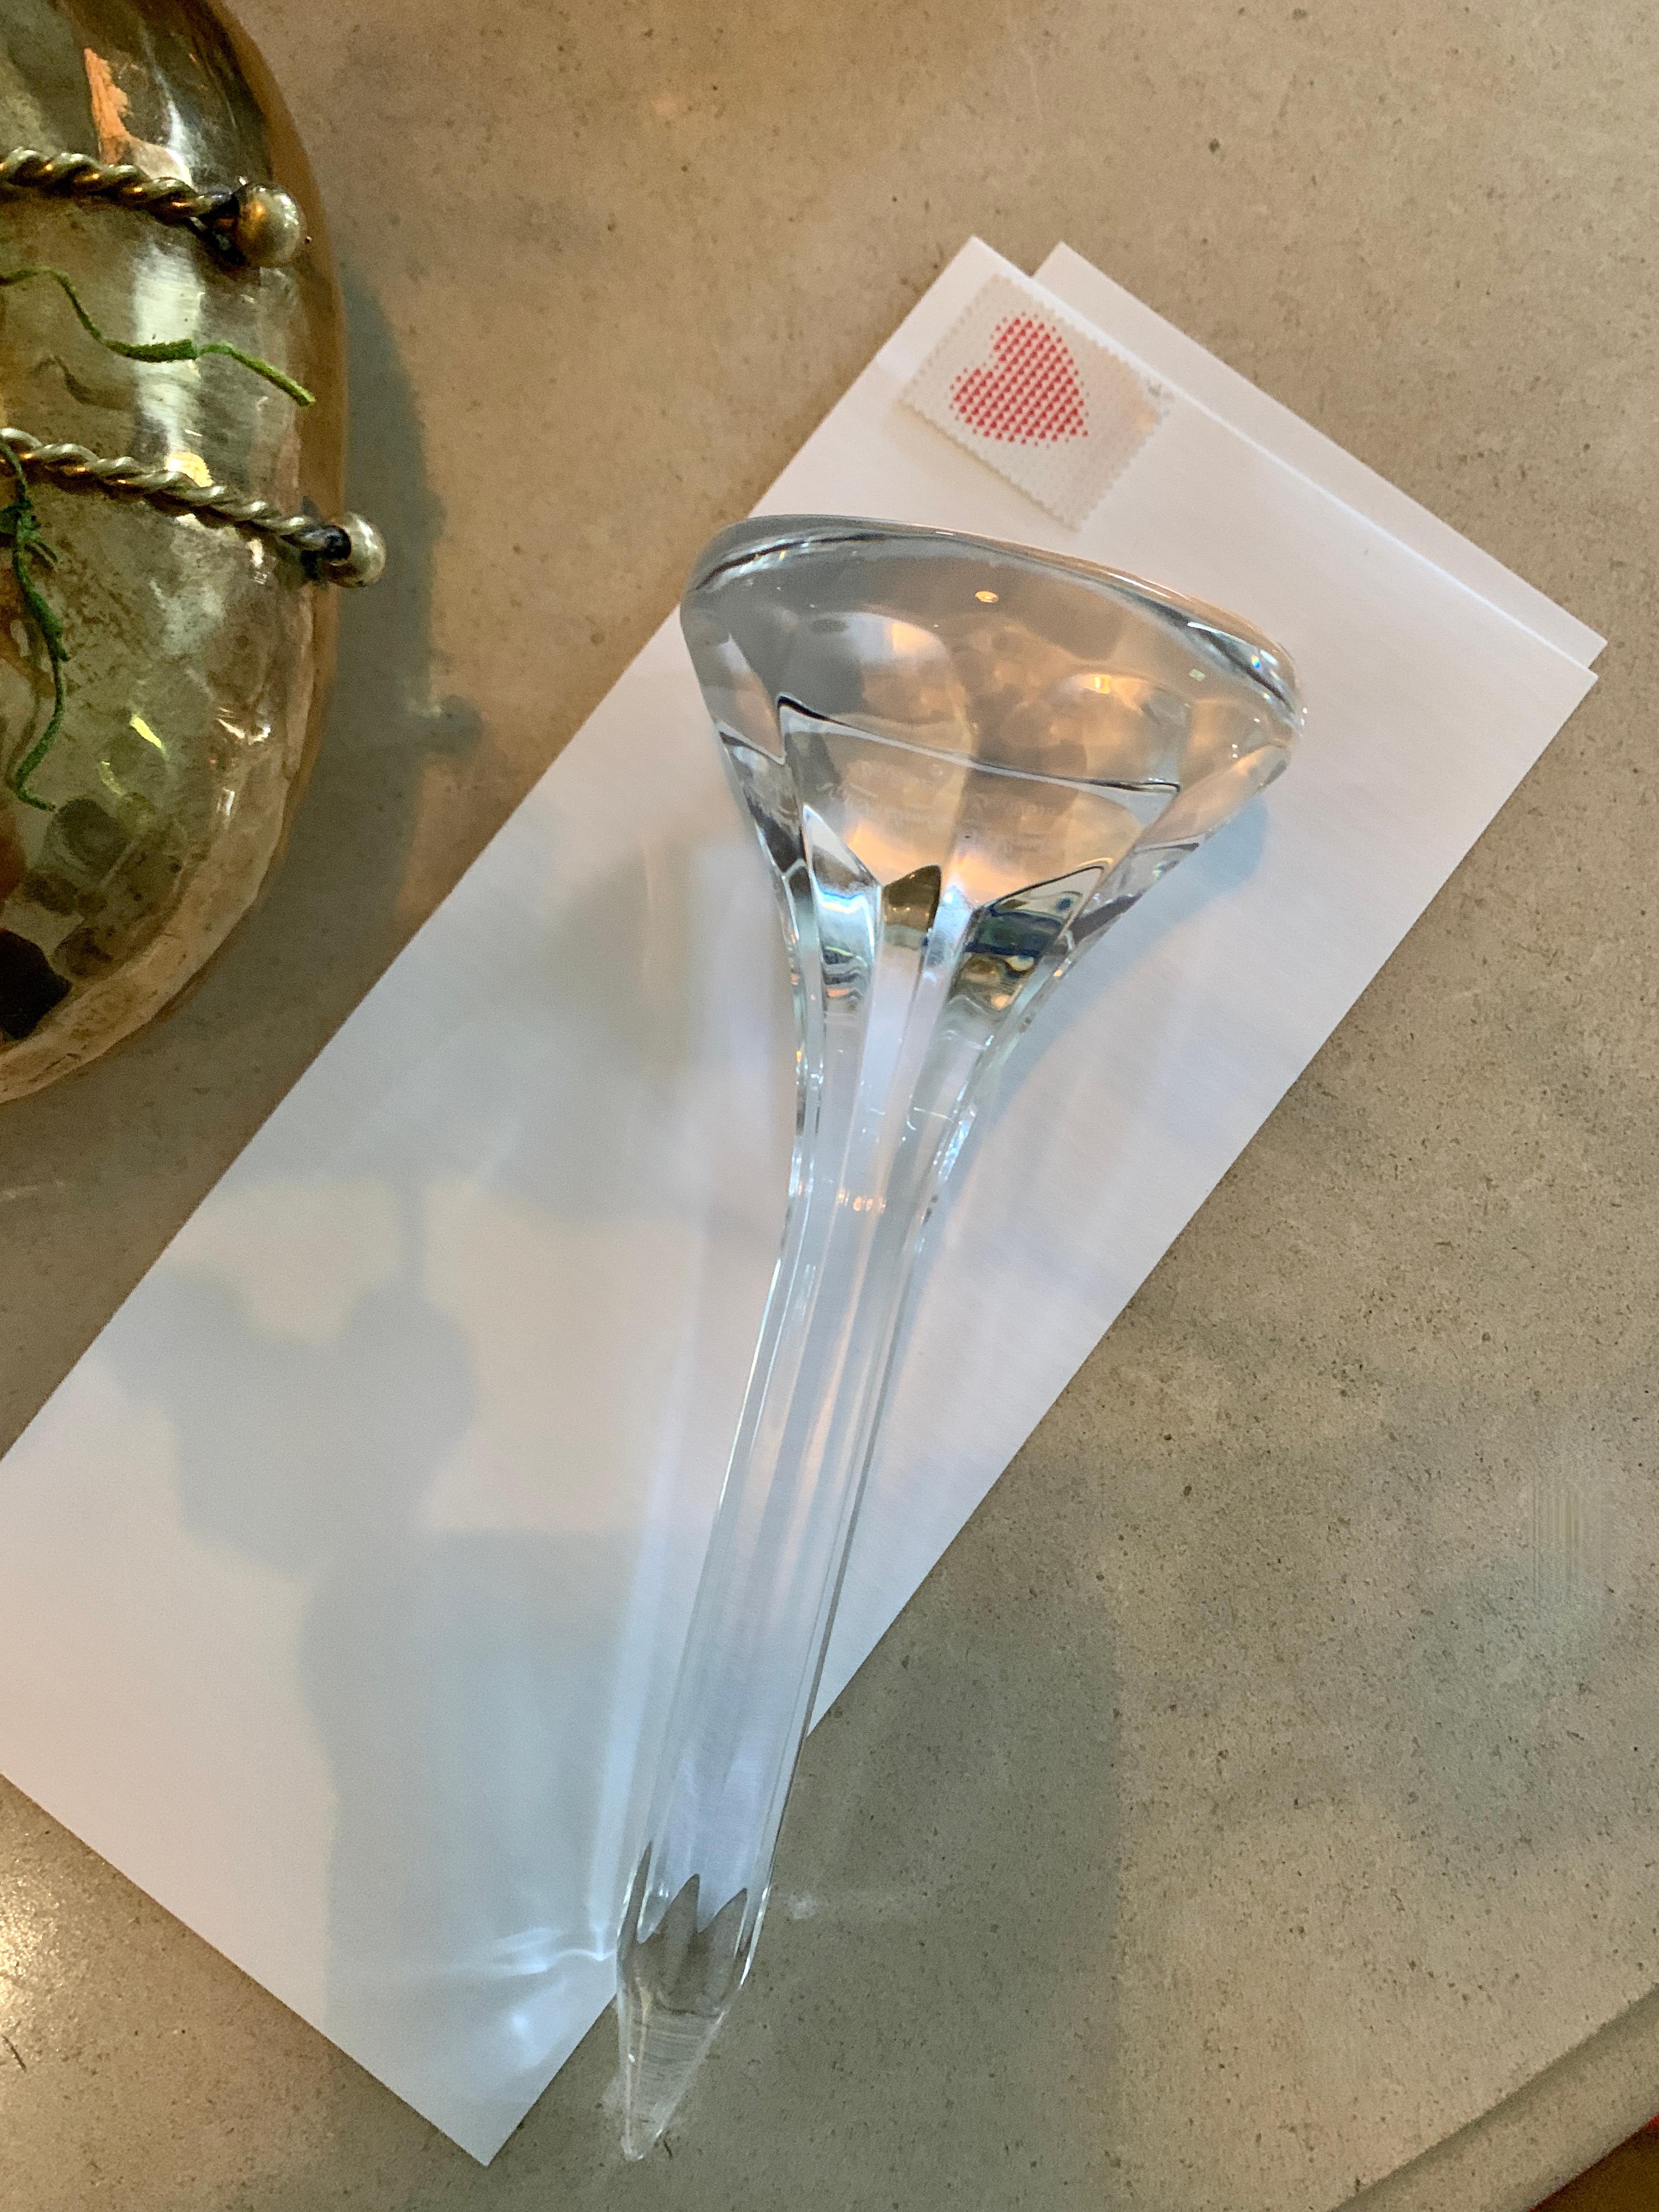 A wonderfully faceted crystal golf tee... the piece is very solid and a compliment to any desk or work space and especially those gold aficionados! Most certainly well suited for the sophisticated player with a well appointed desk. The facets in